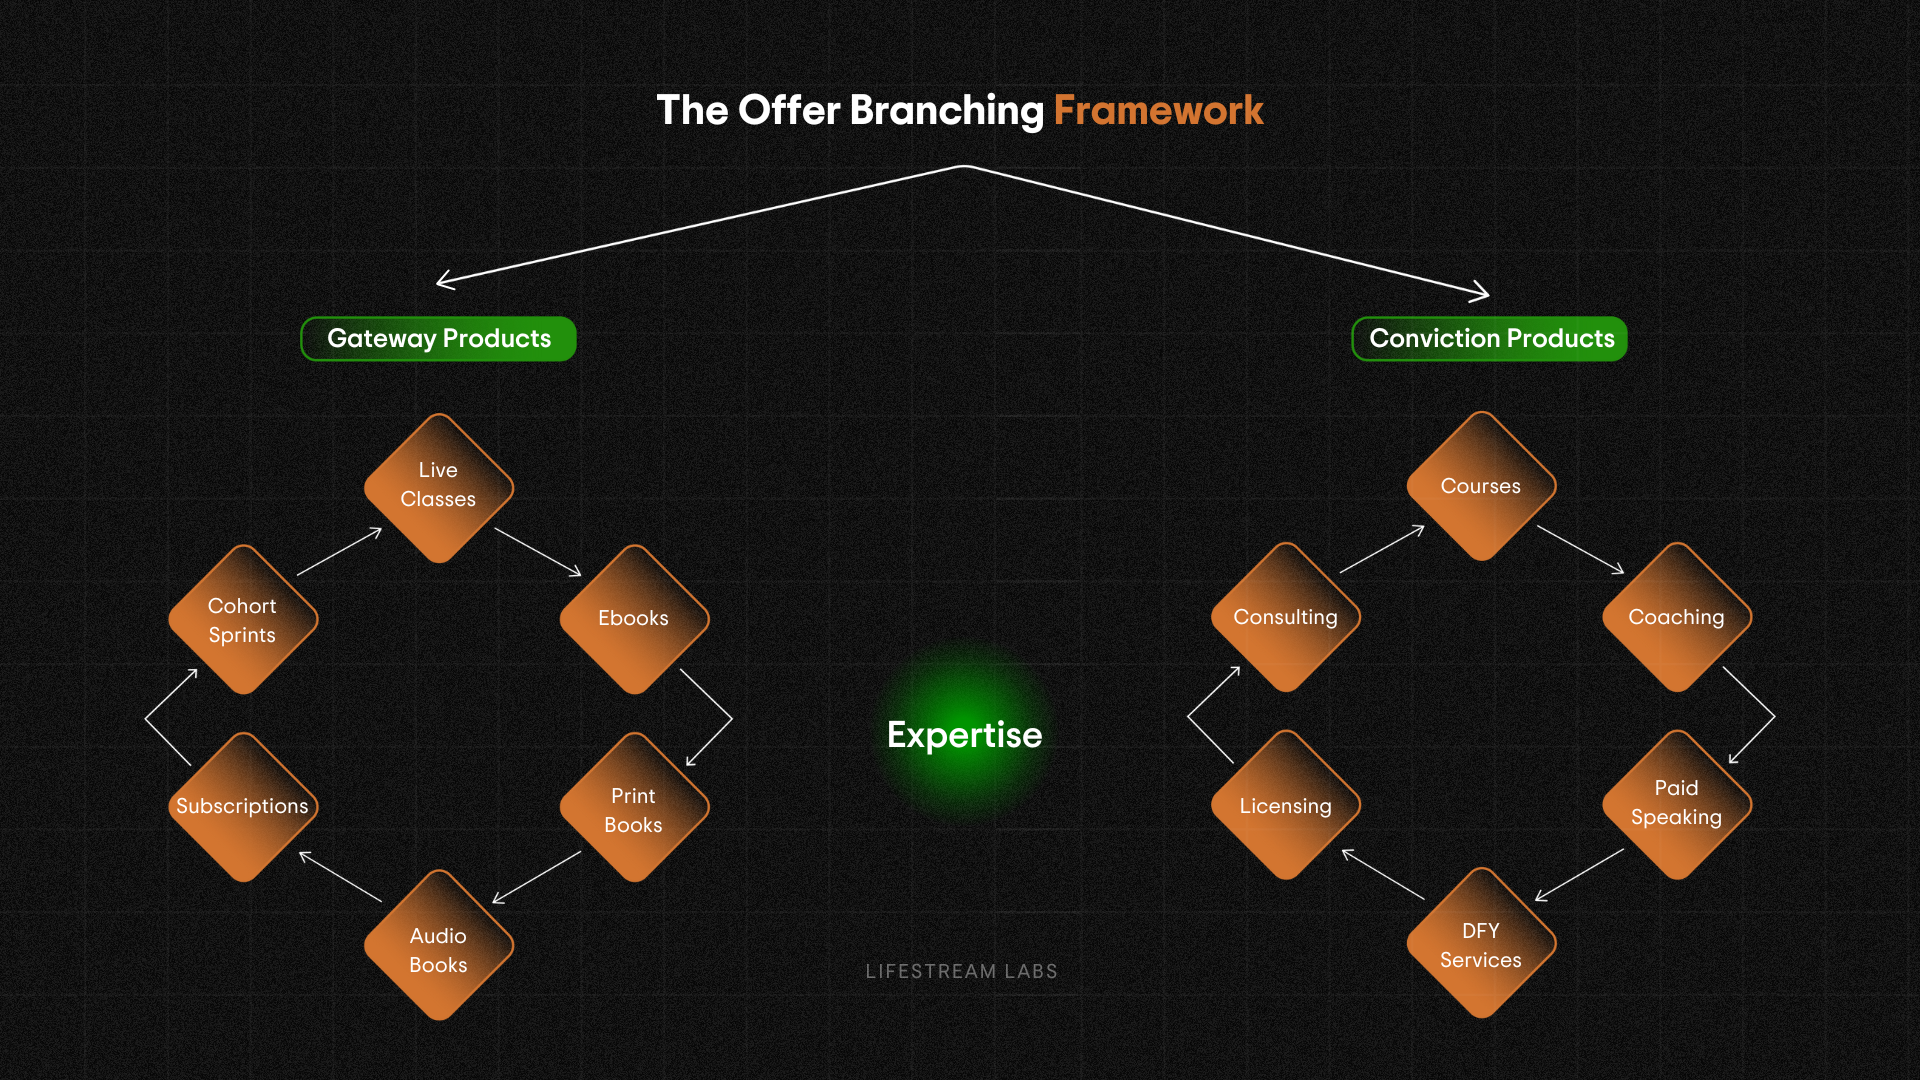 How To 7x-9x Your Customer LTV Using The Offer Branching Framework